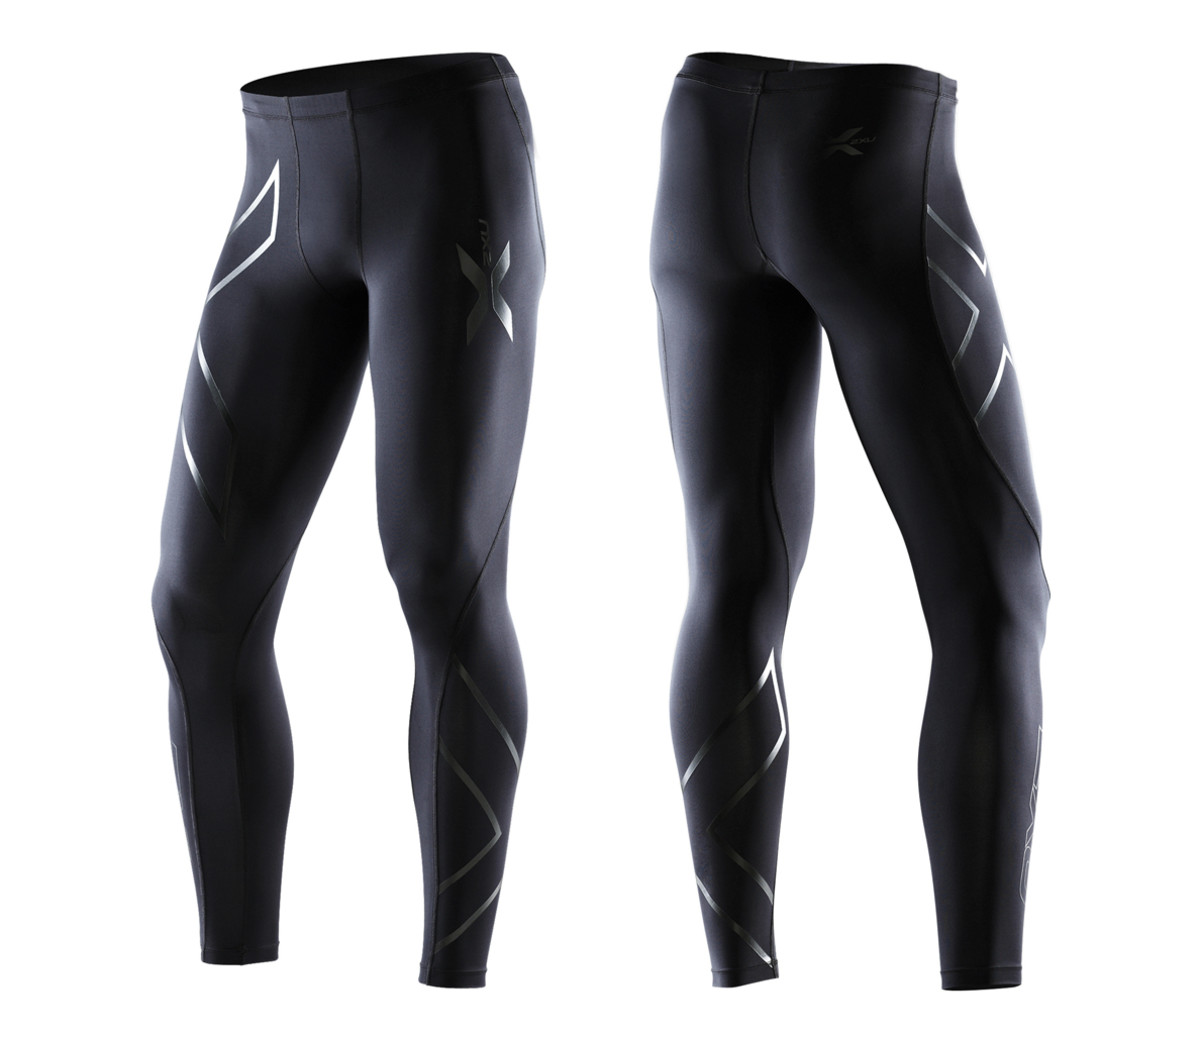 Compression Gear for Post-Workout Recovery - Men's Journal